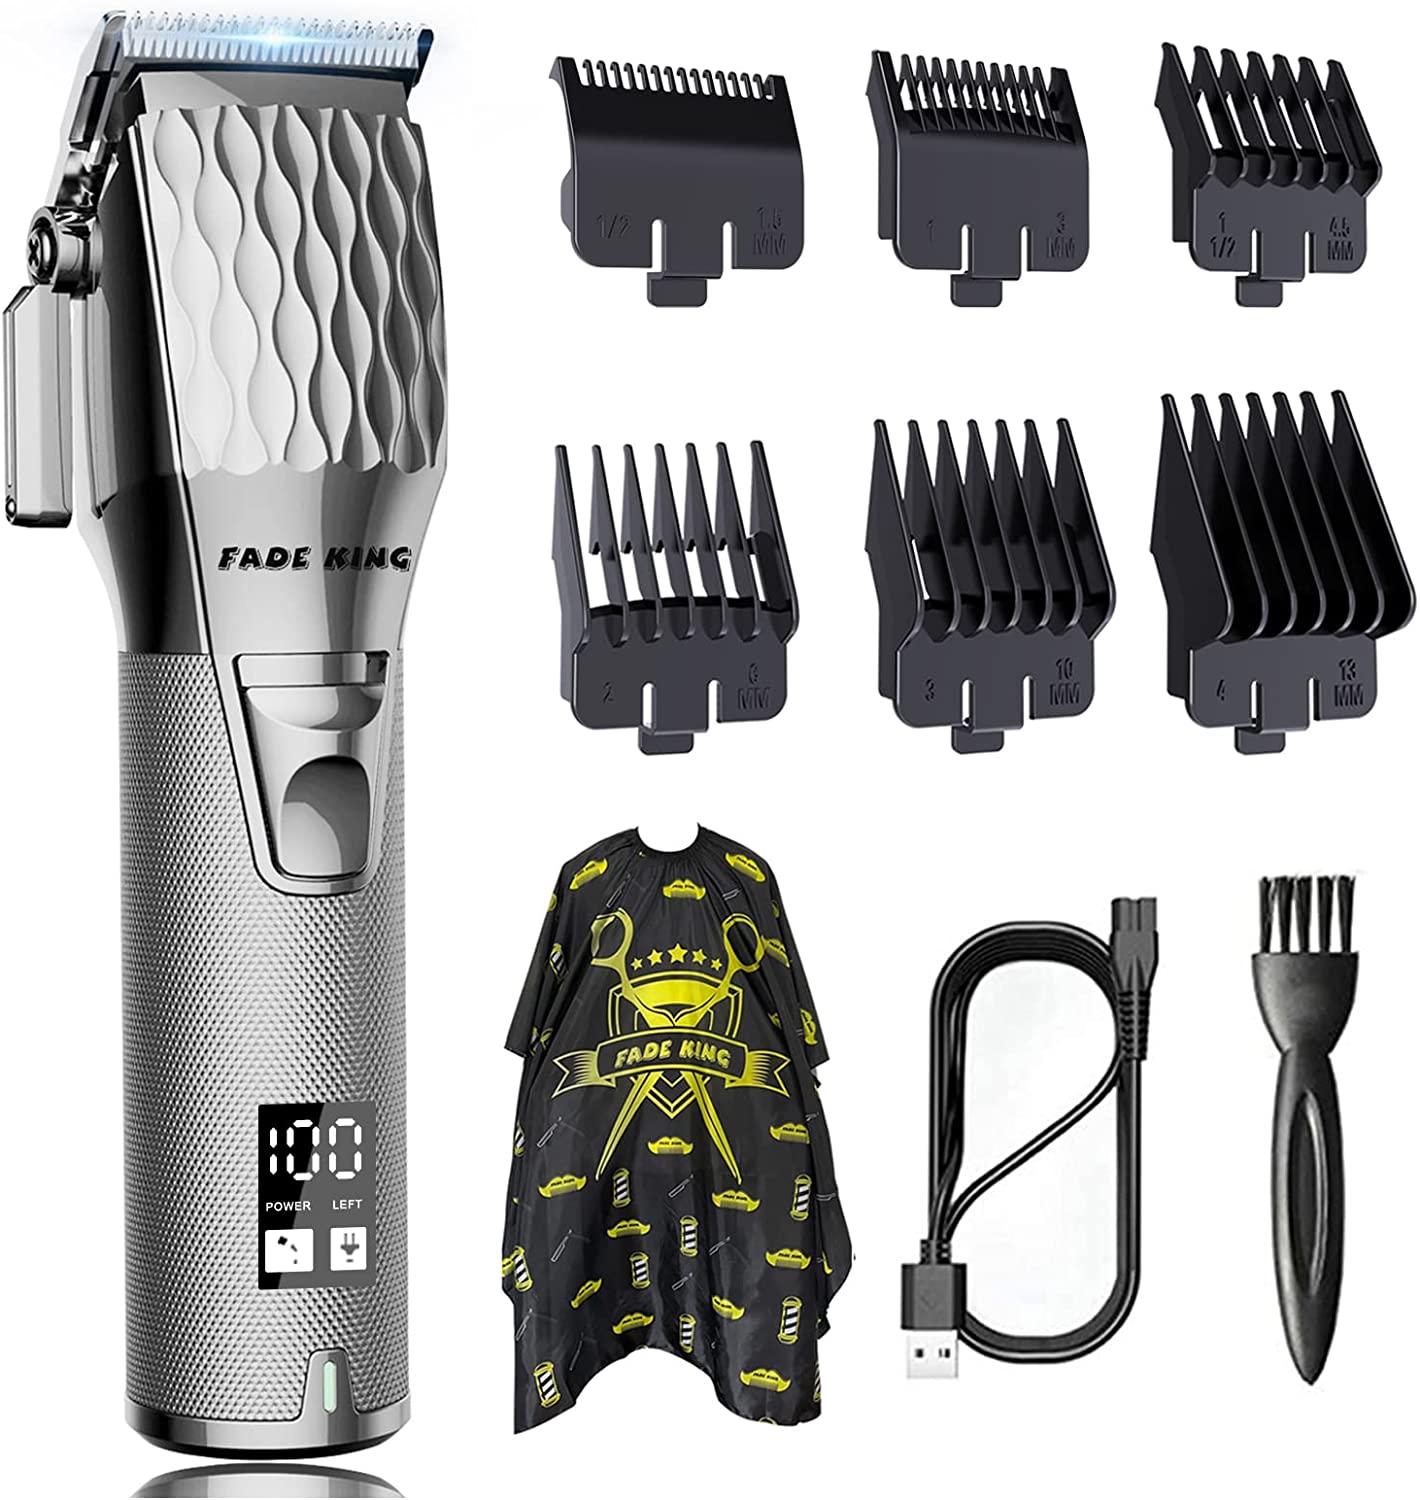 FADEKING Professional Hair Clippers for Men - Cordless Barber Clippers for Hair Cutting, Rechargeable Hair Beard Trimmer with LED Display & Quality Travel Storage Case (Red+Silver)